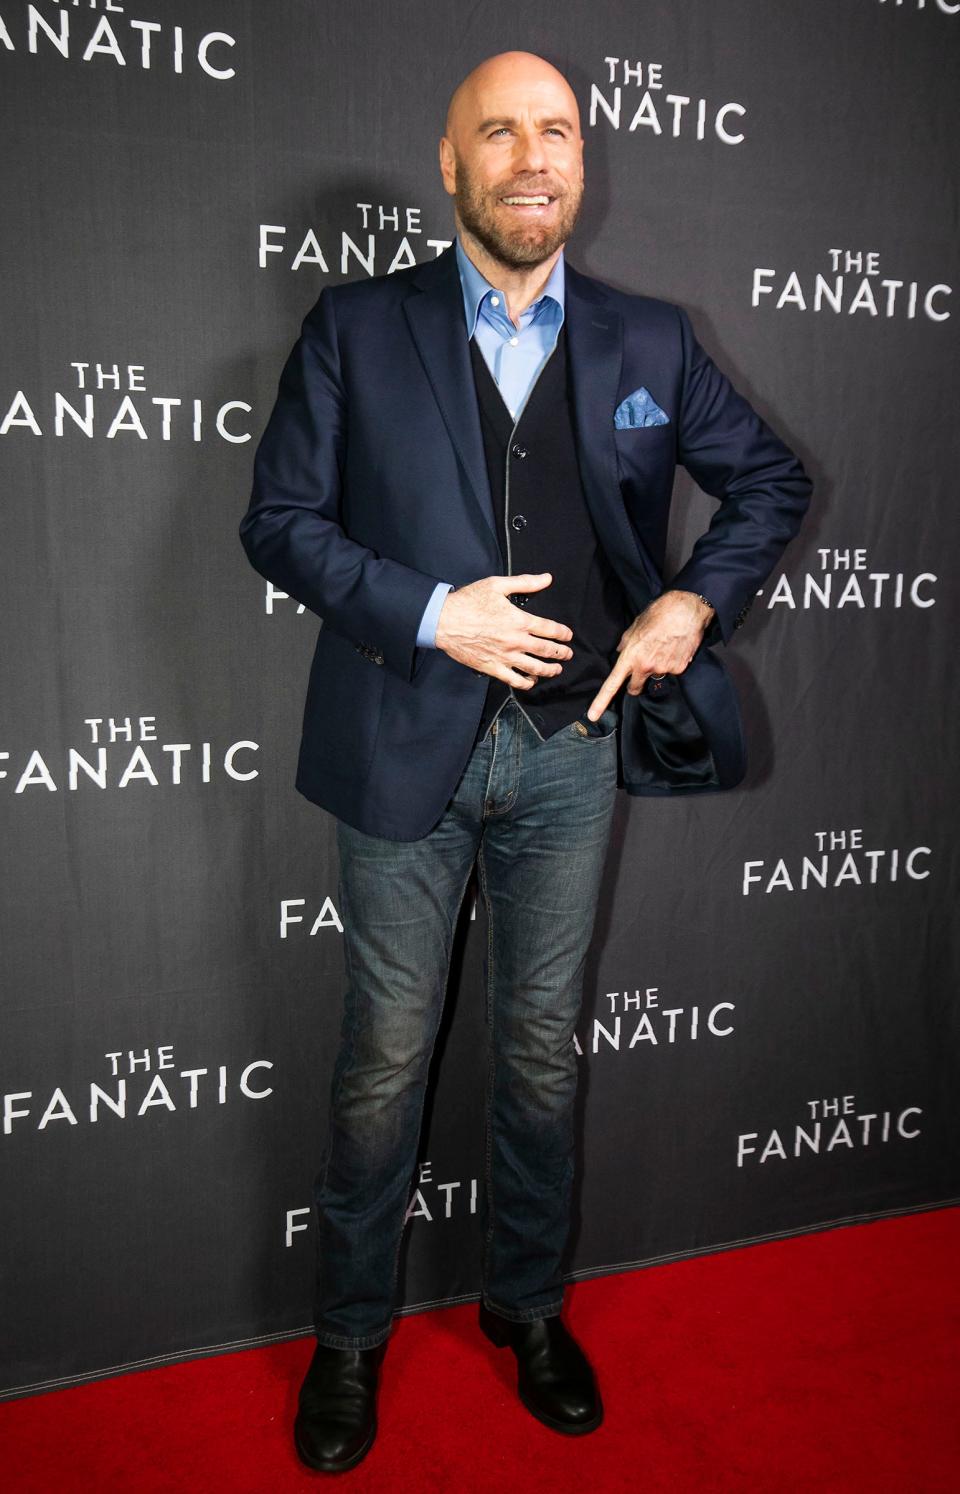 John Travolta in 2019 at a screening of his film "The Fanatic" in The Villages.